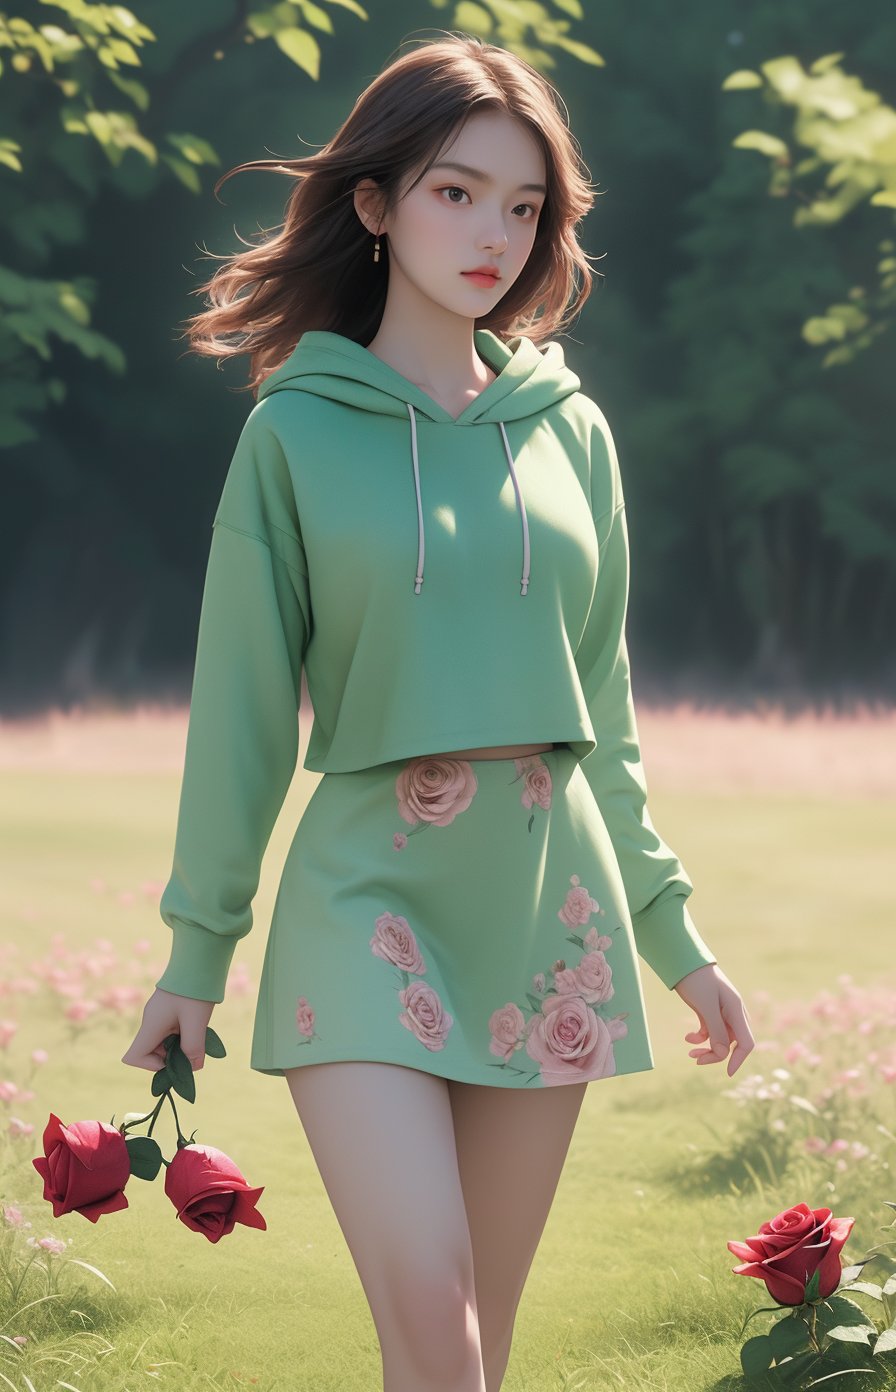 Oil painting, (girl holding a single rose), very delicate and soft lighting, details, Ultra HD, 8k, animated film, soft floral dress, walking through a meadow full of wide green grass,Beautiful girl, topper hoodie, mini skirt 